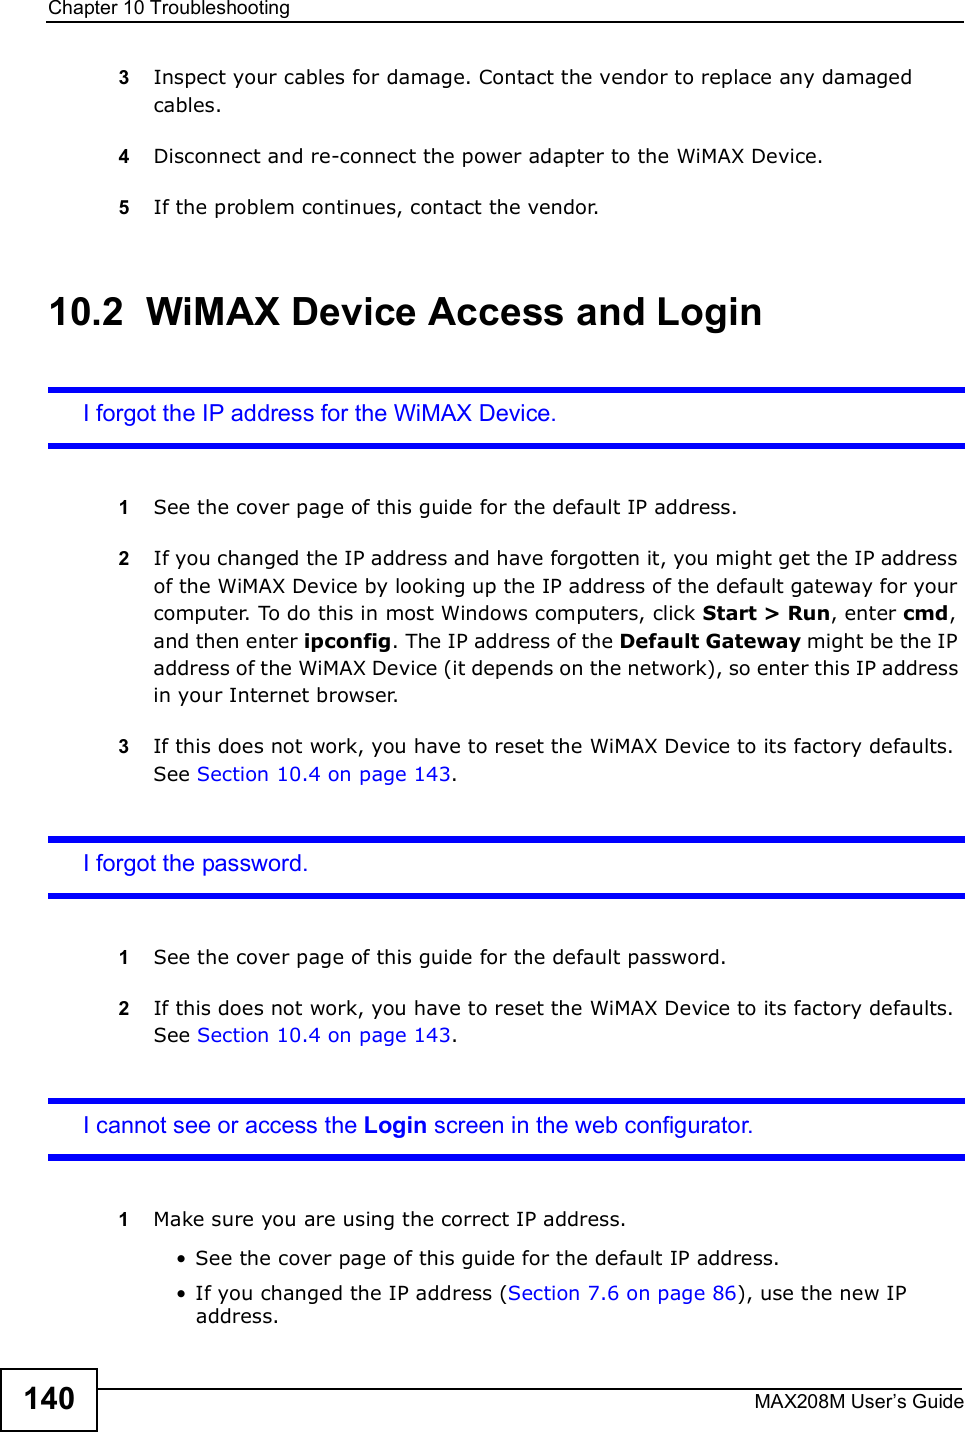 Chapter 10TroubleshootingMAX208M User s Guide1403Inspect your cables for damage. Contact the vendor to replace any damaged cables.4Disconnect and re-connect the power adapter to the WiMAX Device.5If the problem continues, contact the vendor.10.2  WiMAX Device Access and LoginI forgot the IP address for the WiMAX Device.1See the cover page of this guide for the default IP address.2If you changed the IP address and have forgotten it, you might get the IP address of the WiMAX Device by looking up the IP address of the default gateway for your computer. To do this in most Windows computers, click Start &gt; Run, enter cmd, and then enter ipconfig. The IP address of the Default Gateway might be the IP address of the WiMAX Device (it depends on the network), so enter this IP address in your Internet browser.3If this does not work, you have to reset the WiMAX Device to its factory defaults. See Section 10.4 on page 143.I forgot the password.1See the cover page of this guide for the default password.2If this does not work, you have to reset the WiMAX Device to its factory defaults. See Section 10.4 on page 143.I cannot see or access the Login screen in the web configurator.1Make sure you are using the correct IP address.!See the cover page of this guide for the default IP address.!If you changed the IP address (Section 7.6 on page 86), use the new IP address.